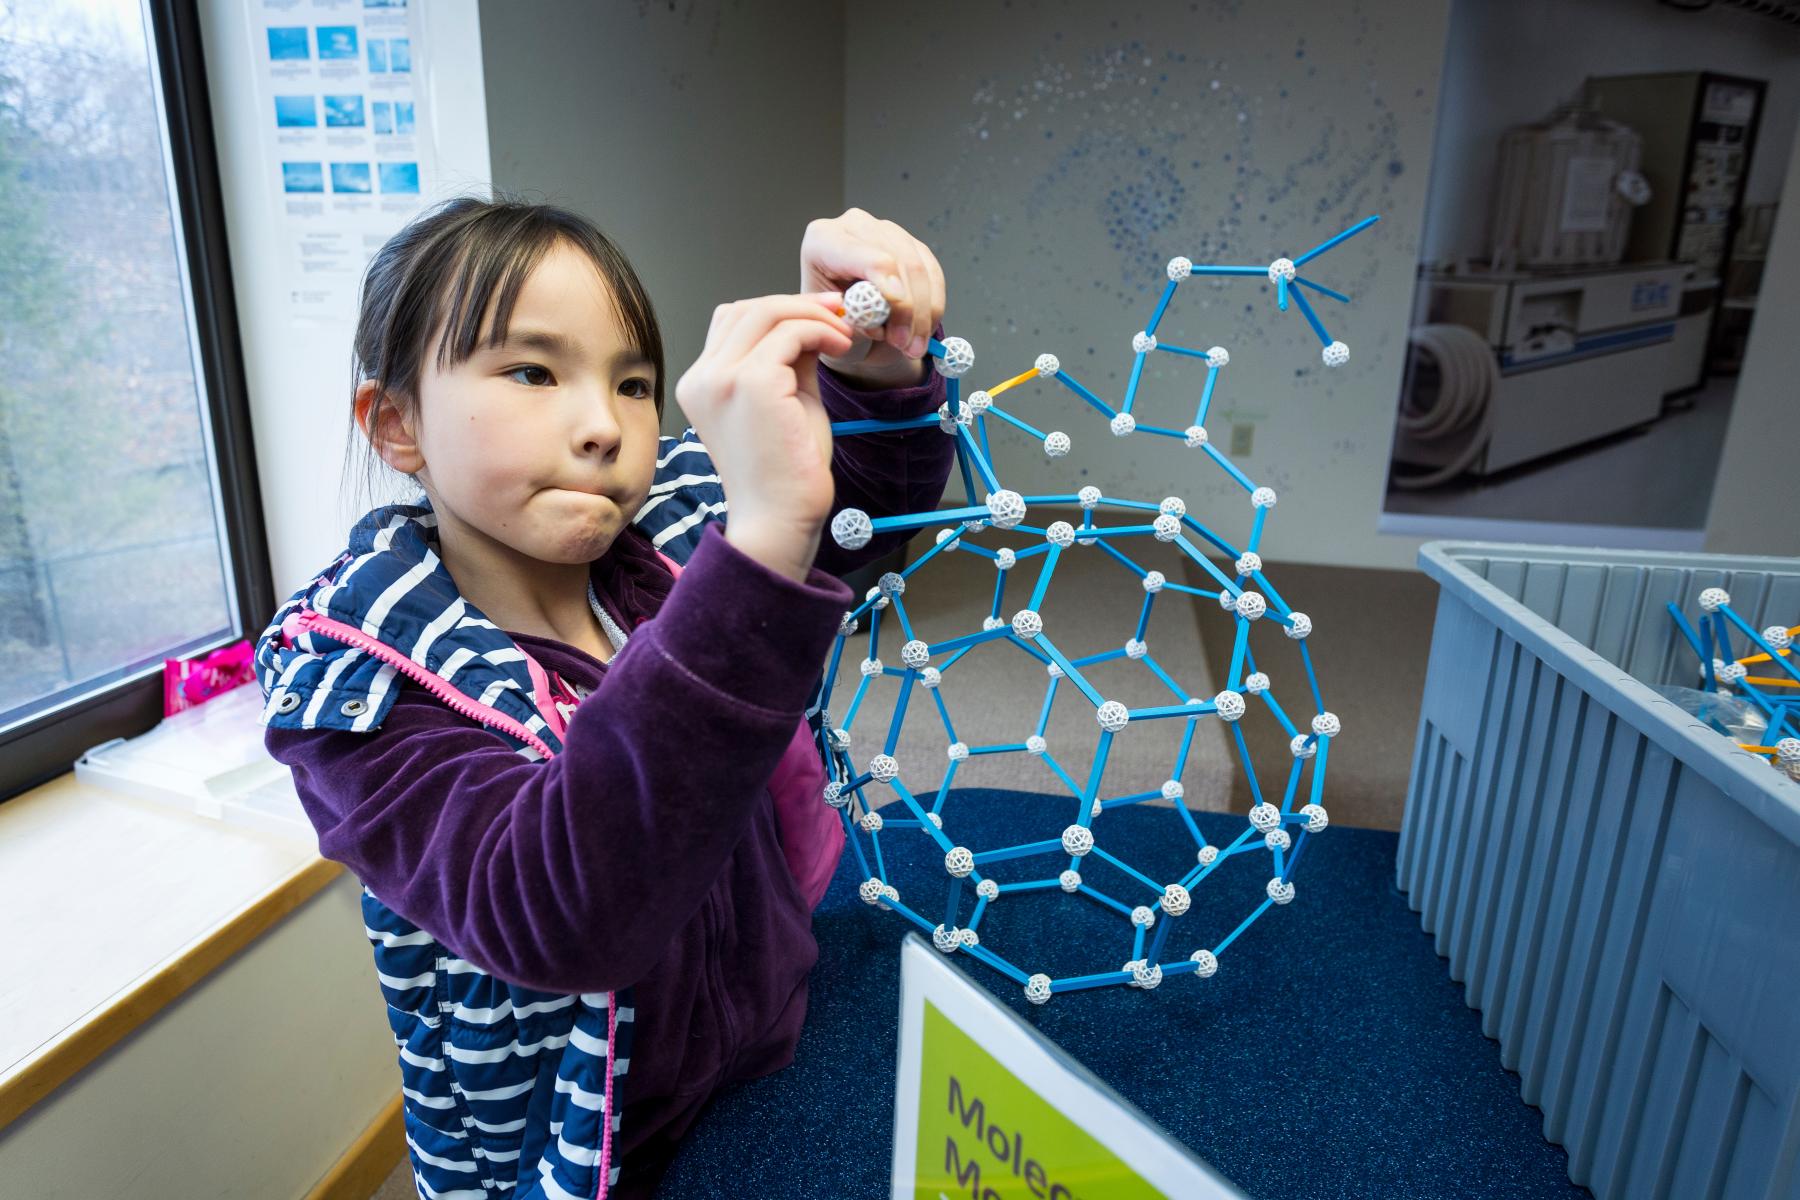 Young learner in a purple jacket assembles a nanotube model made of plastic rods and spheres